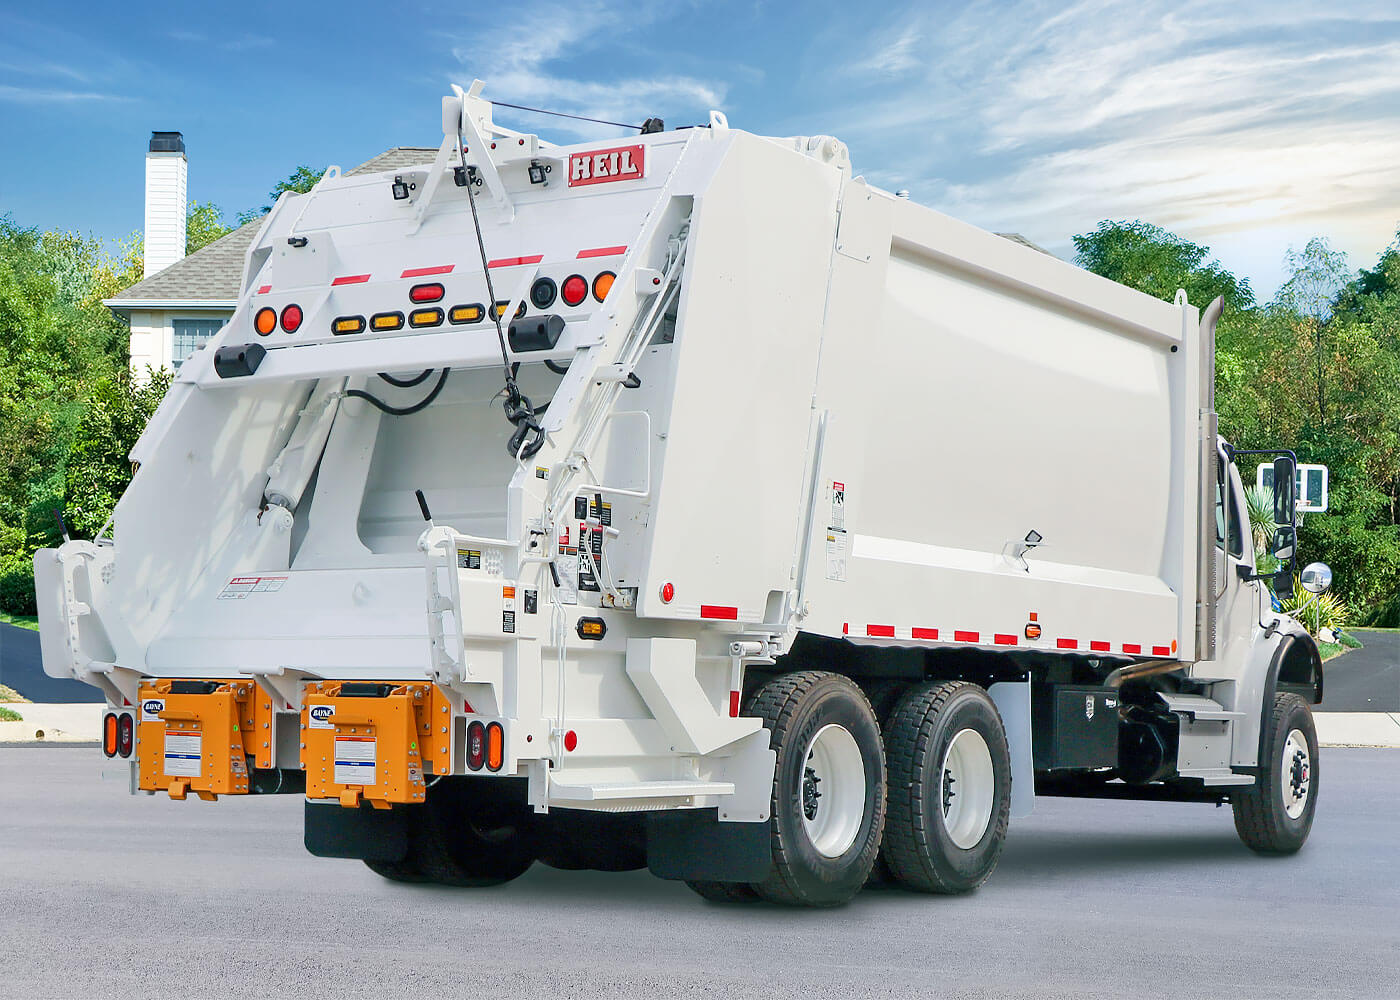 Dura Pack 5000 rear load garbage trucks for sale from Heil waste equipment company